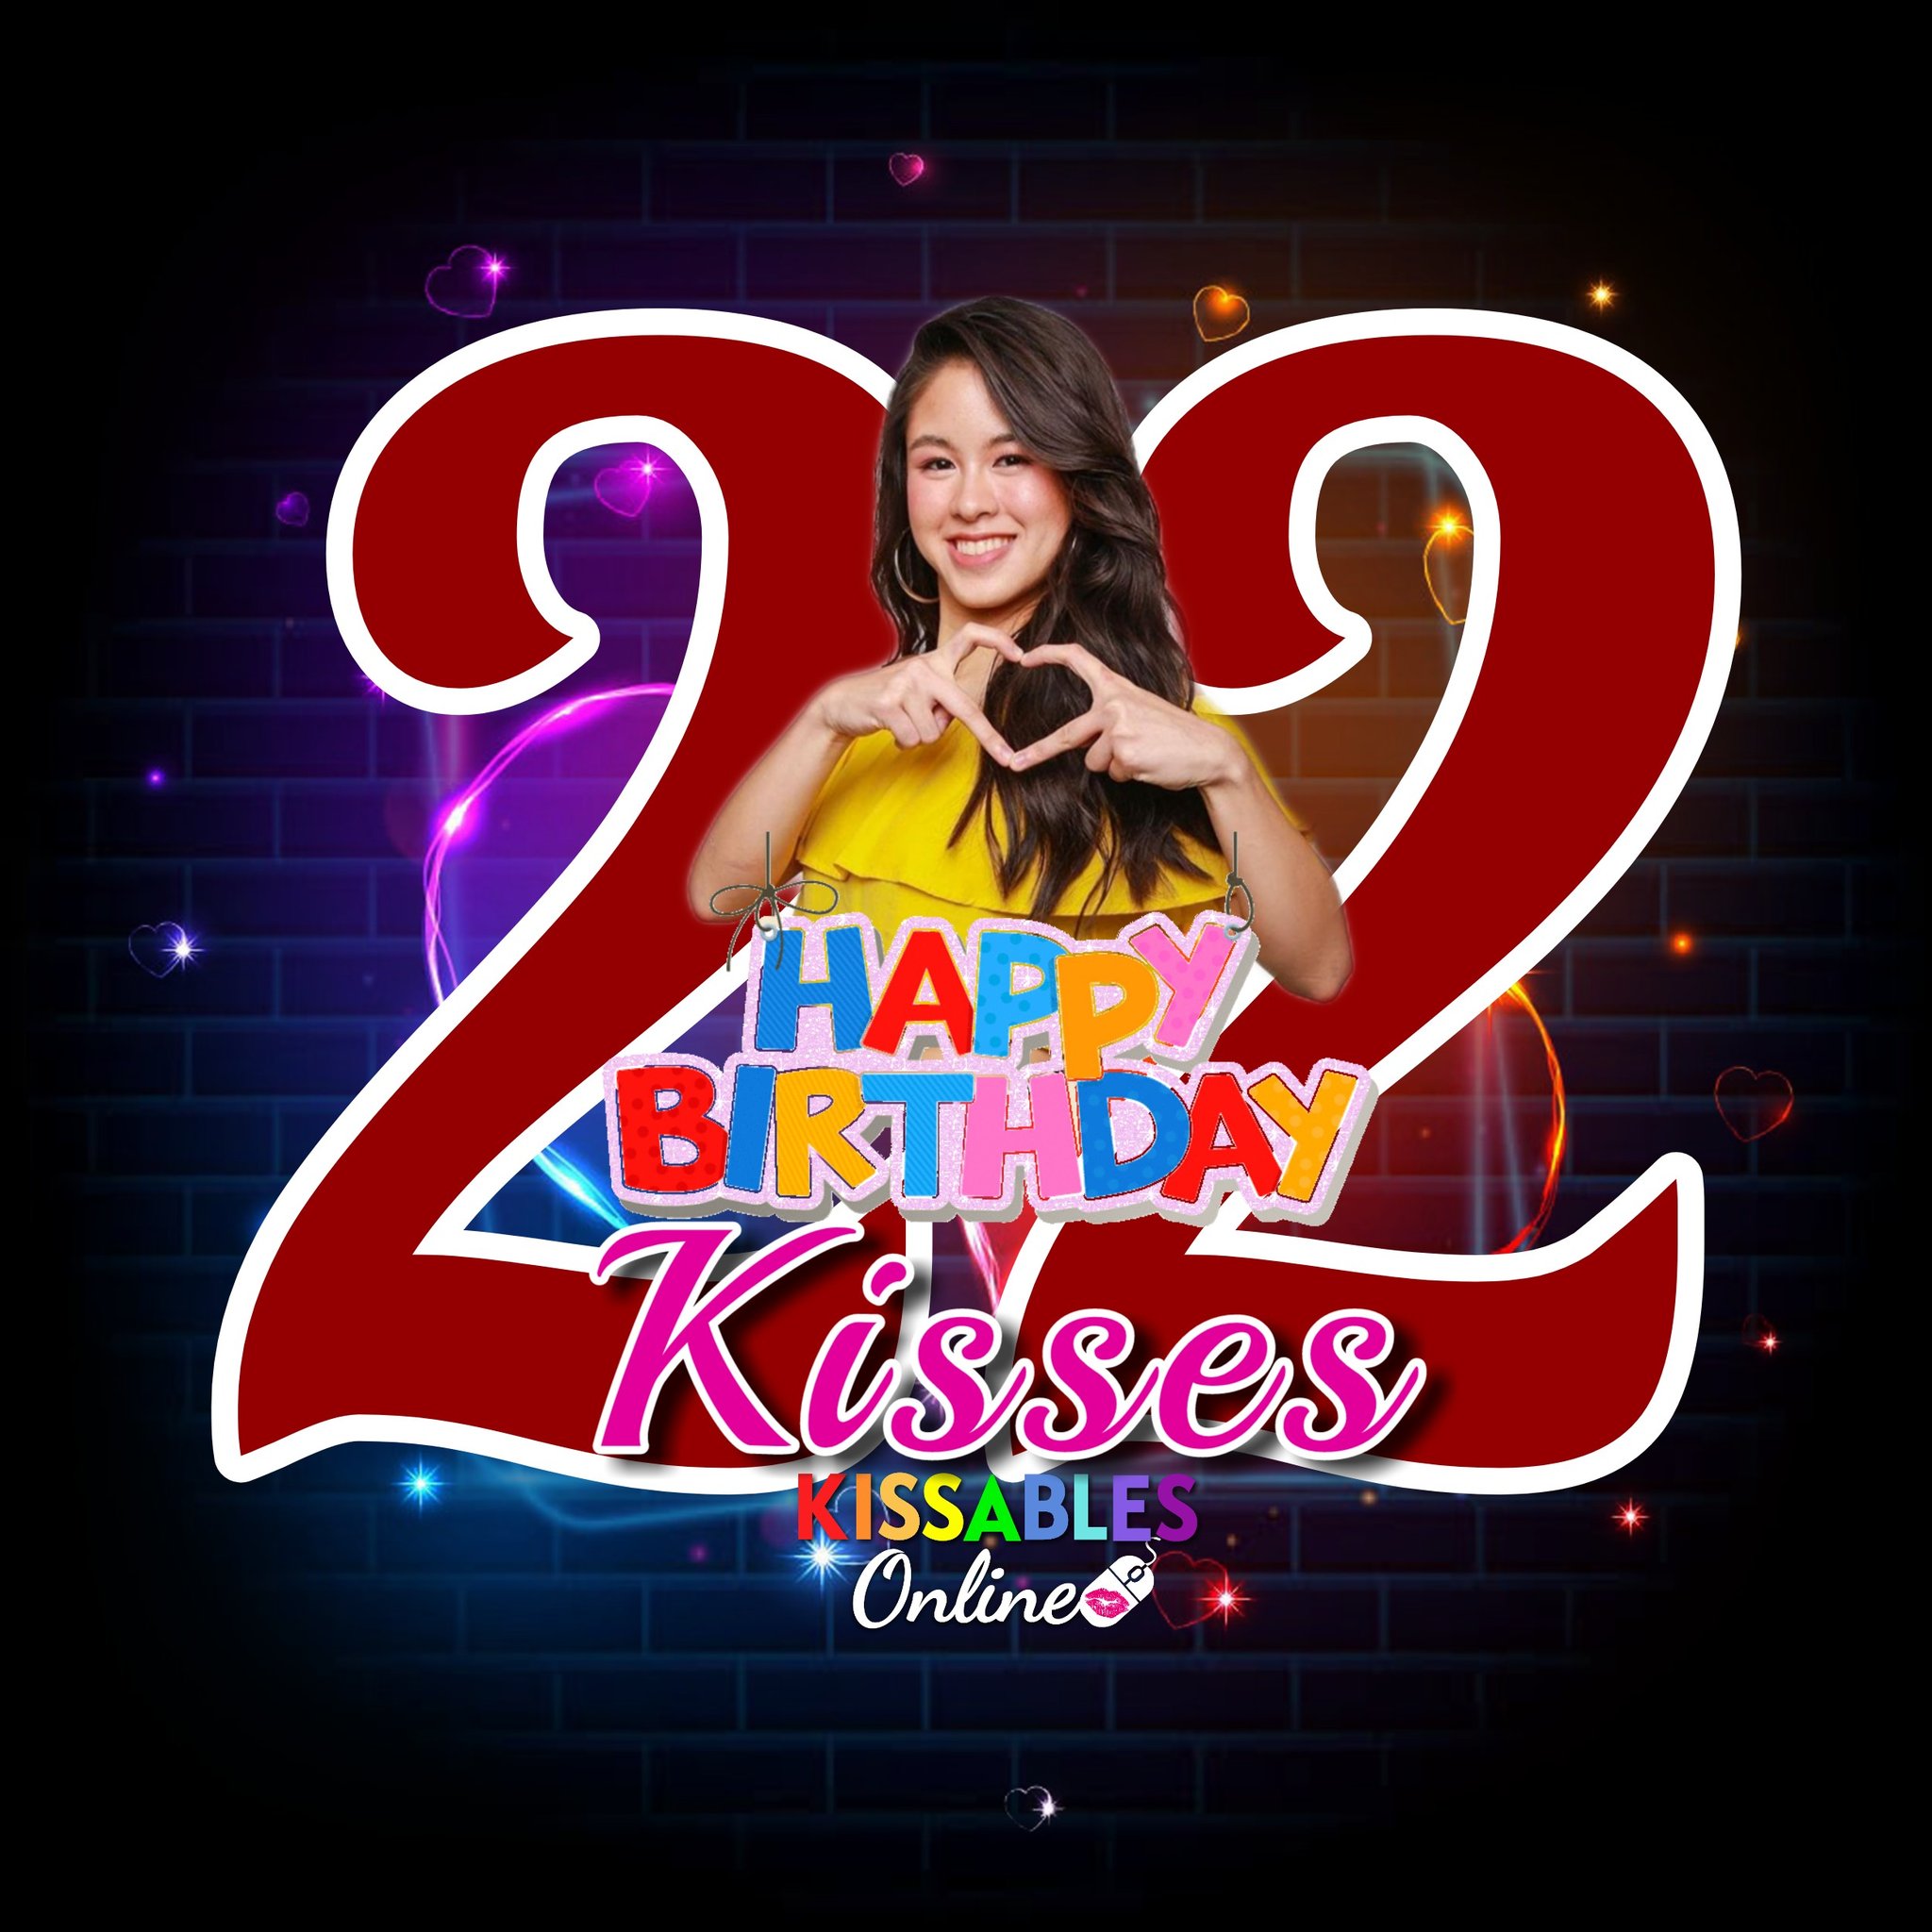 Life is too short to waste on hating other people.
HAPPY BIRTHDAY KISSES

KI22ES 4DONKISSFAM 